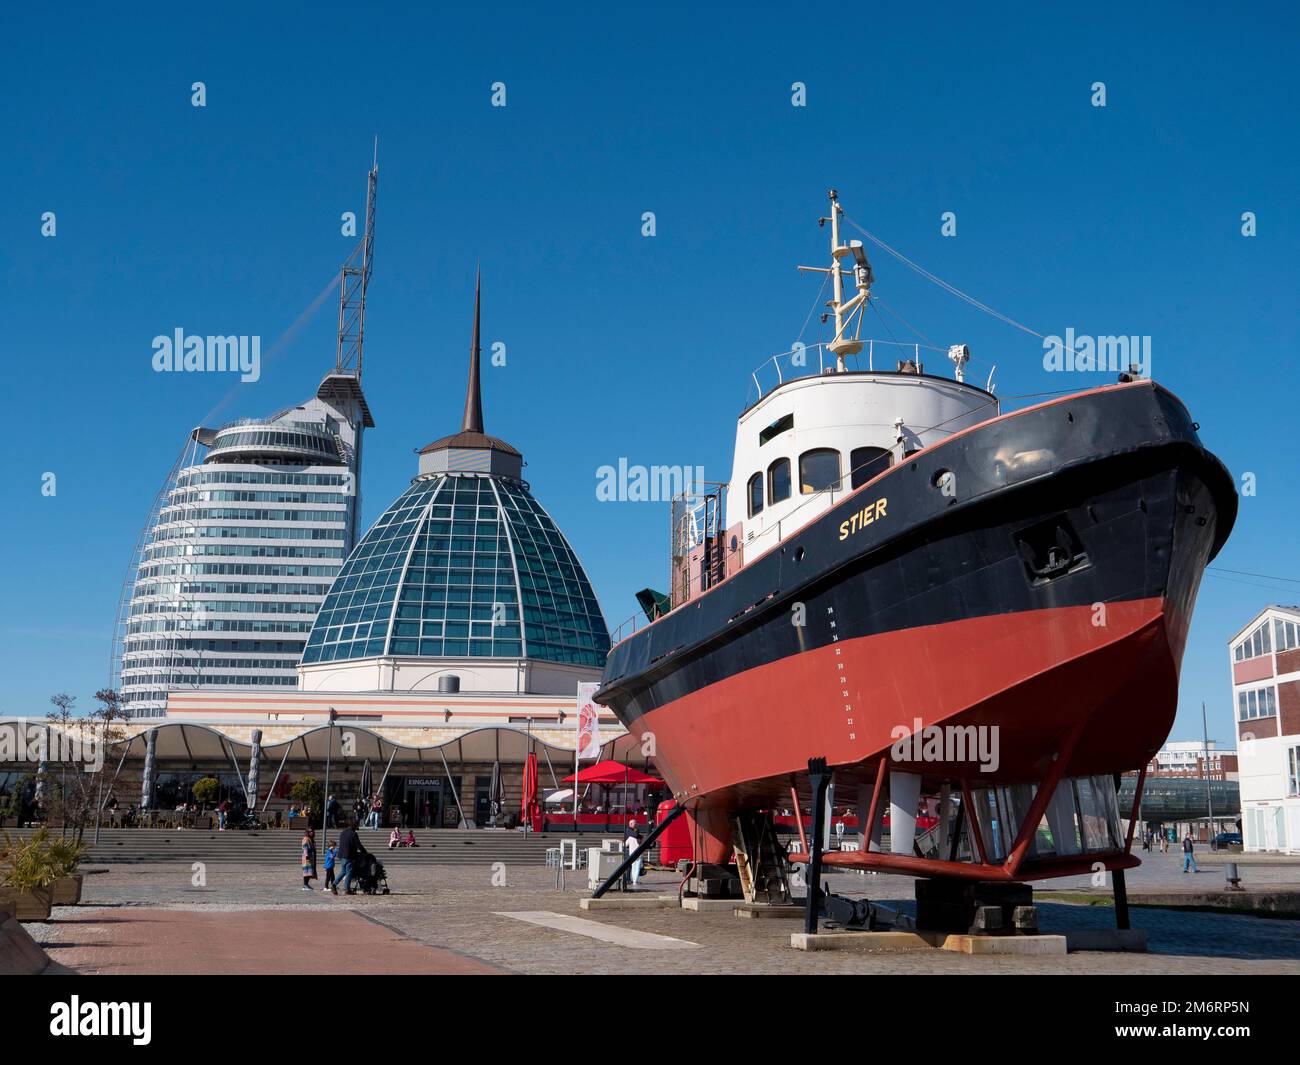 Tugboat Stier in the German Maritime Museum and in the background the glass dome of the restaurant and modern futuristic skyscrapers ATLANTIC Hotels Stock Photo